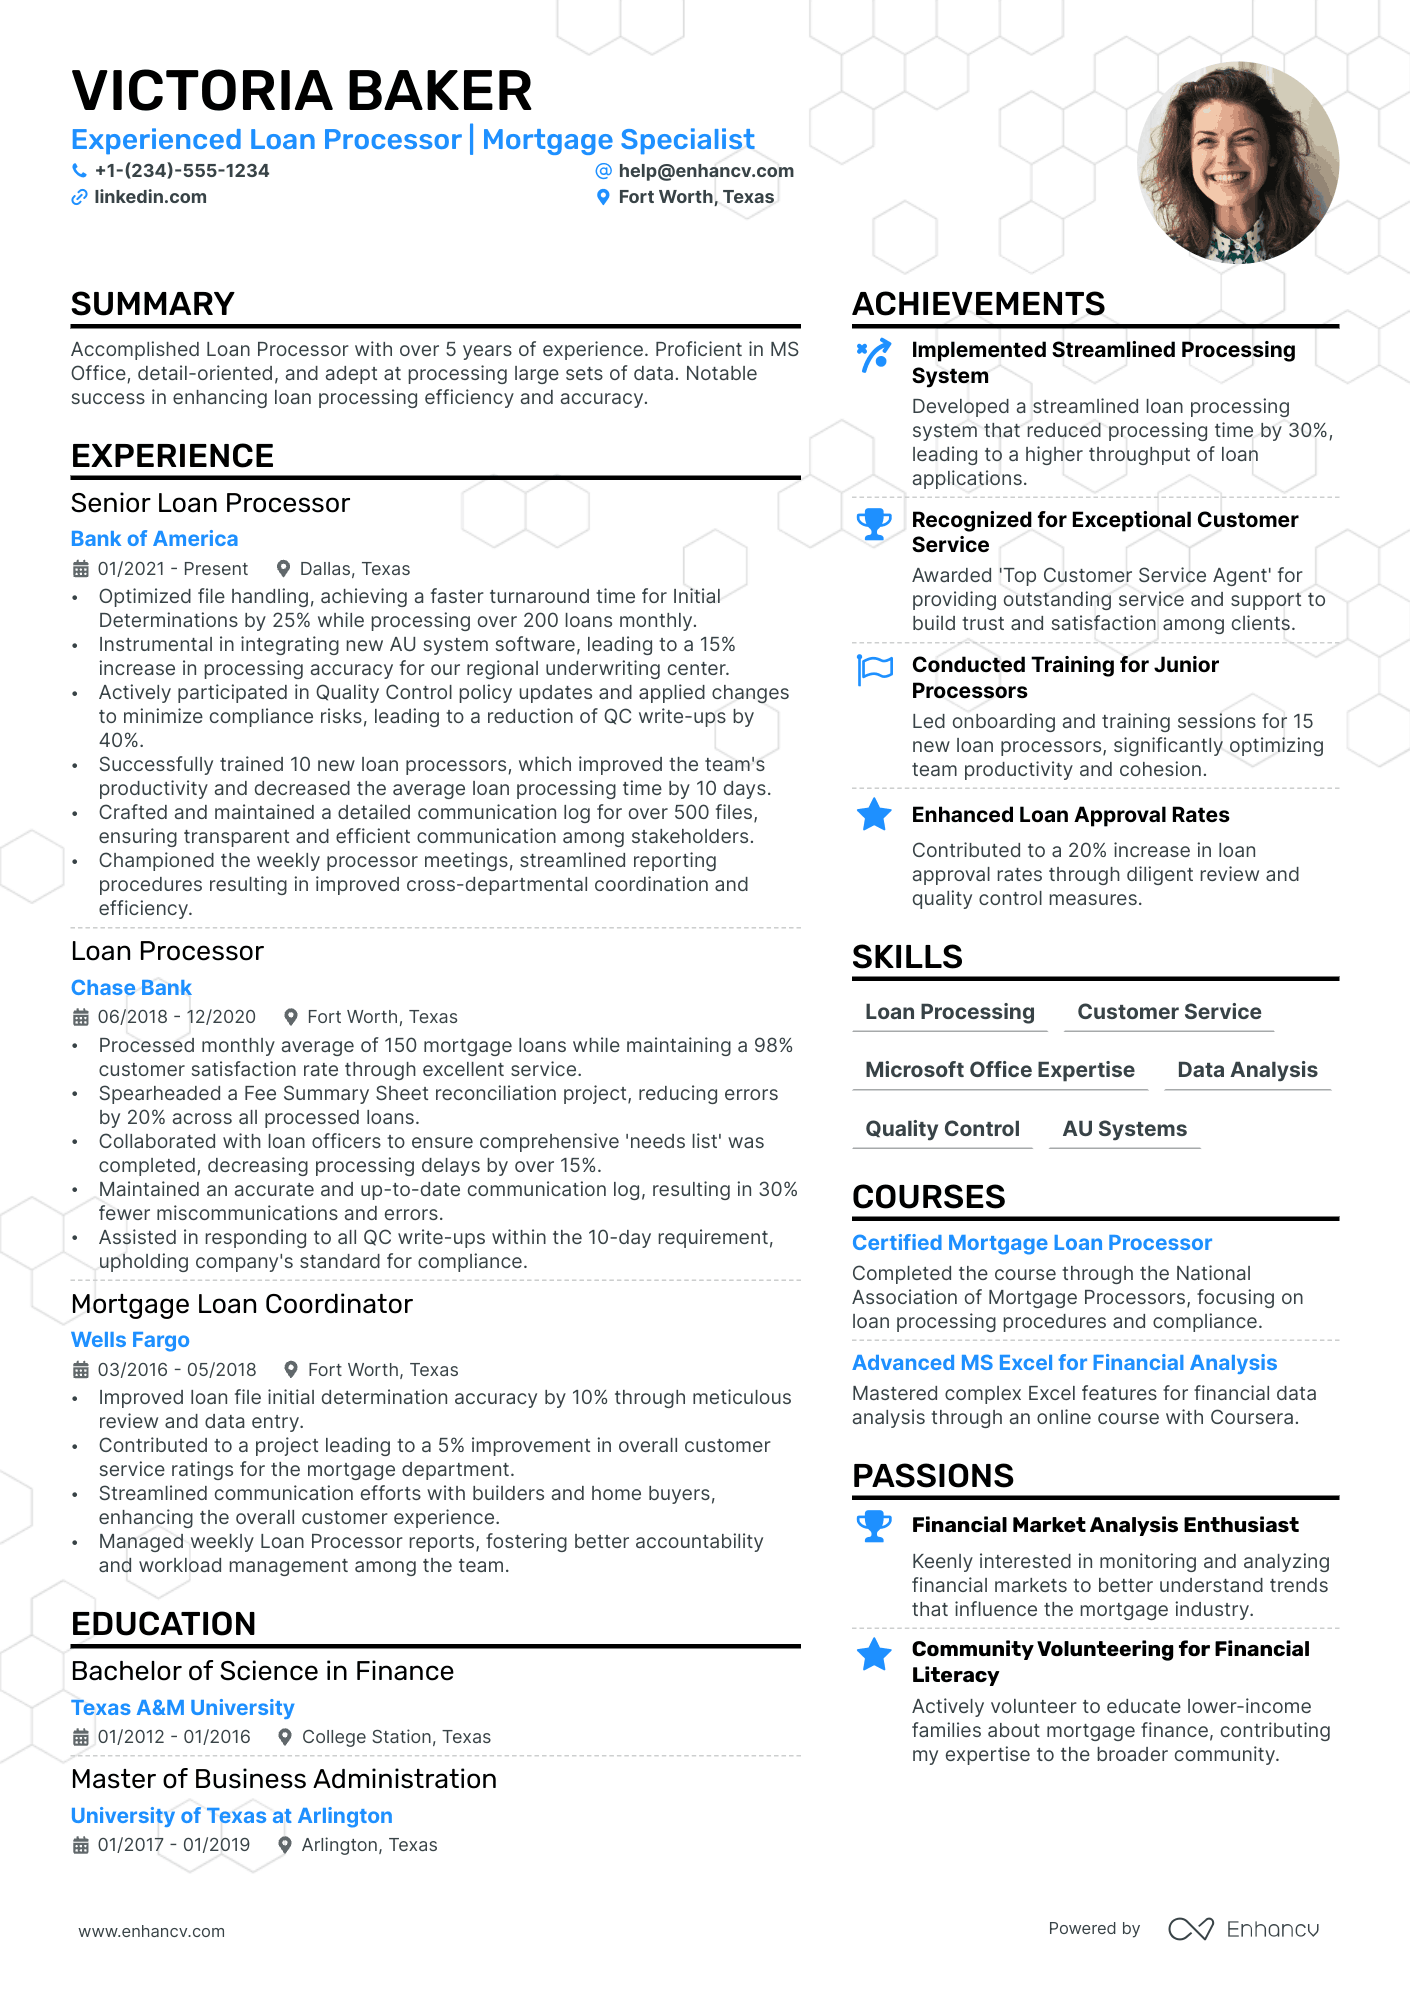 professional summary for resume banking